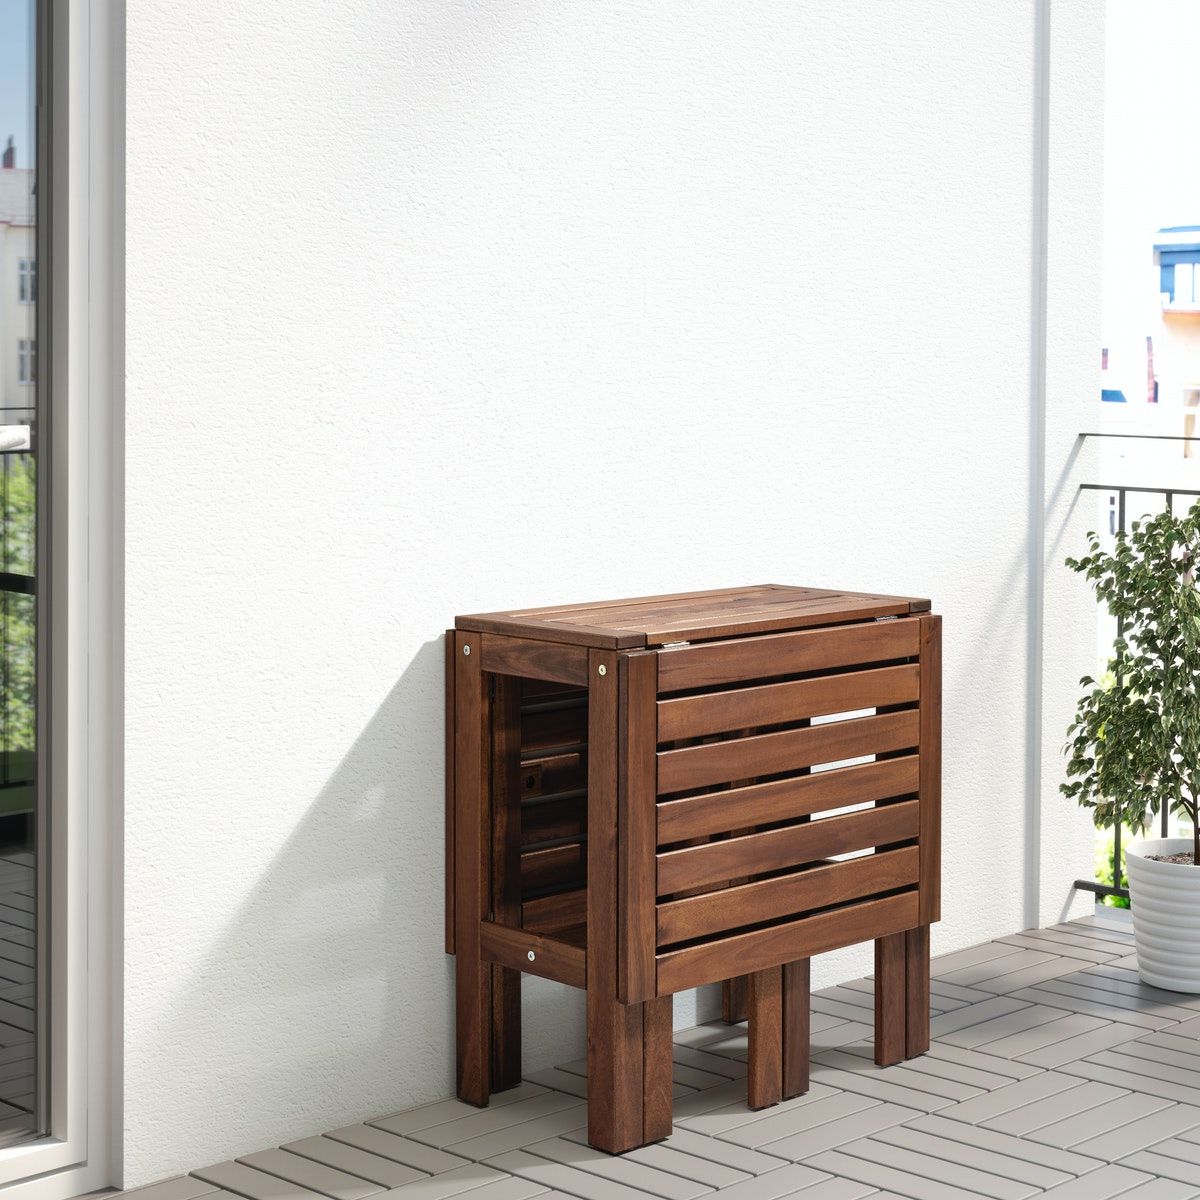 Outdoor Tables With Storage Within Popular Outdoor Dining Tables (View 8 of 15)